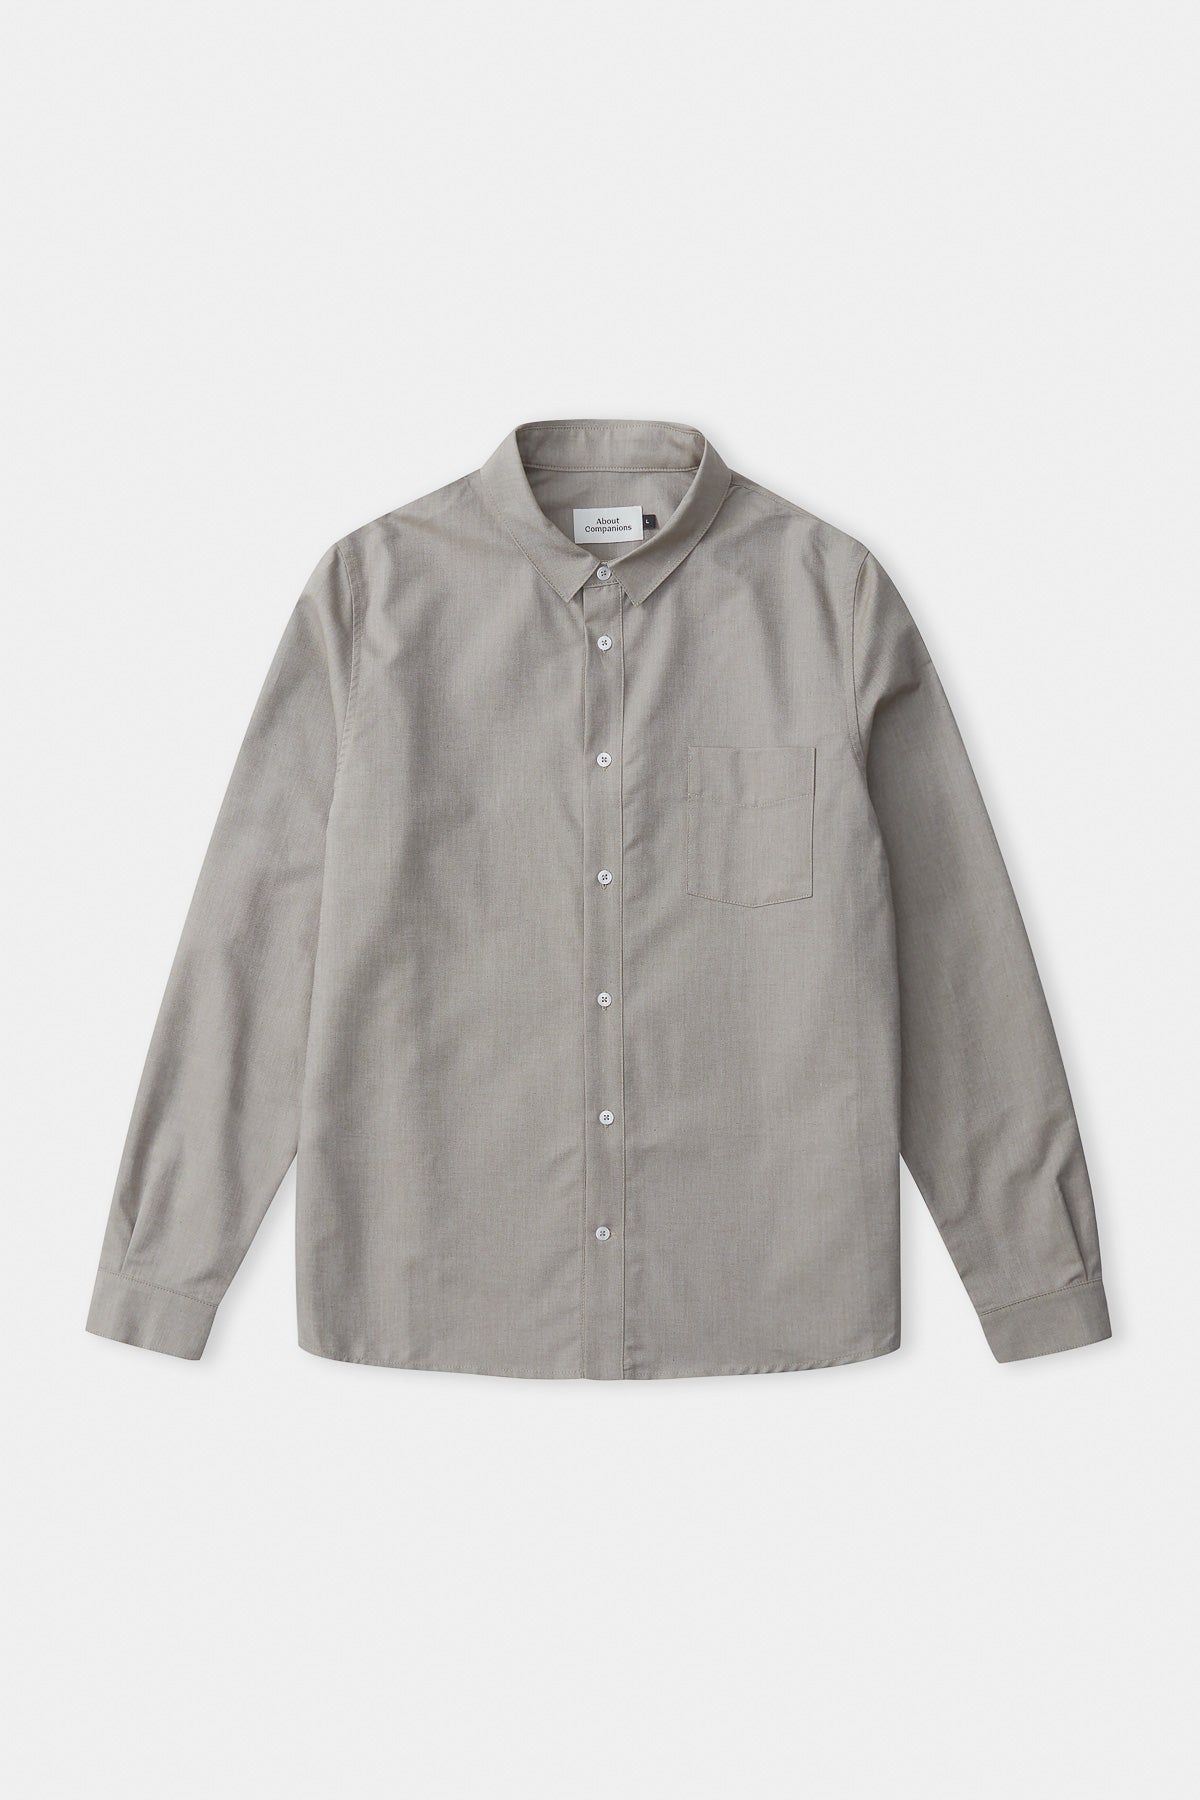 simon oxford shirt, dusty olive, herren - about companions